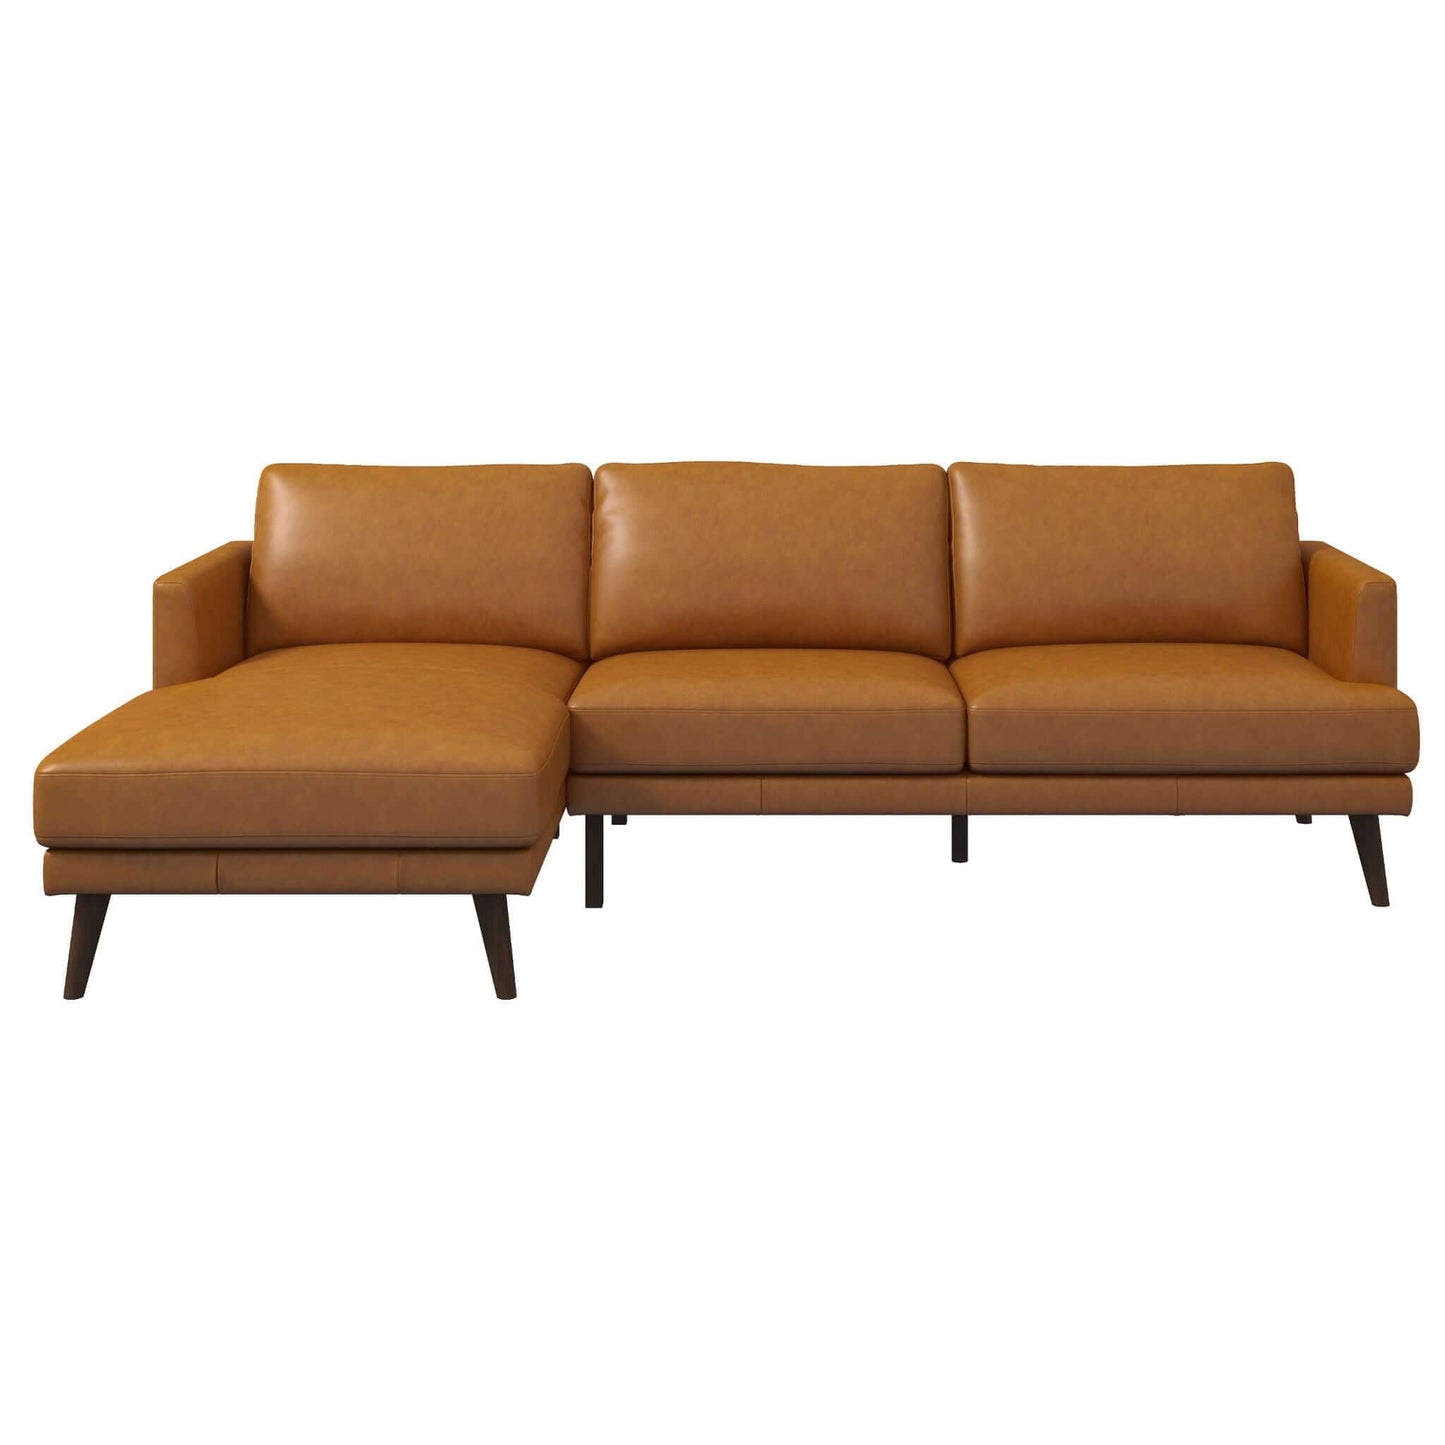 Ashcroft Furniture Co Left Sectional Lore Mid-Century Modern L-Shaped Genuine Leather Sectional in Tan